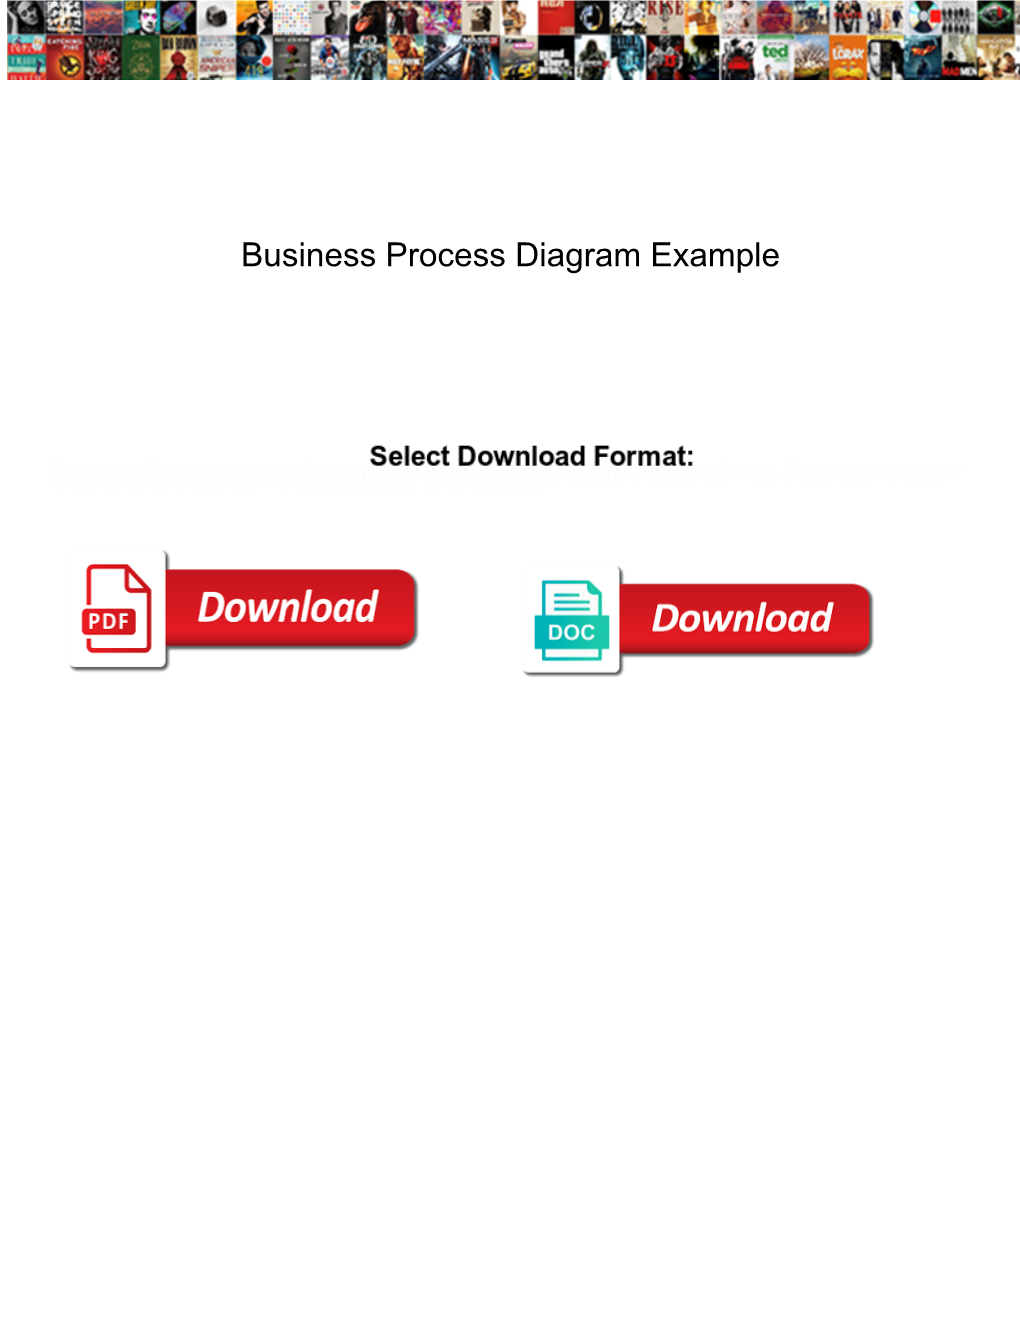 Business Process Diagram Example